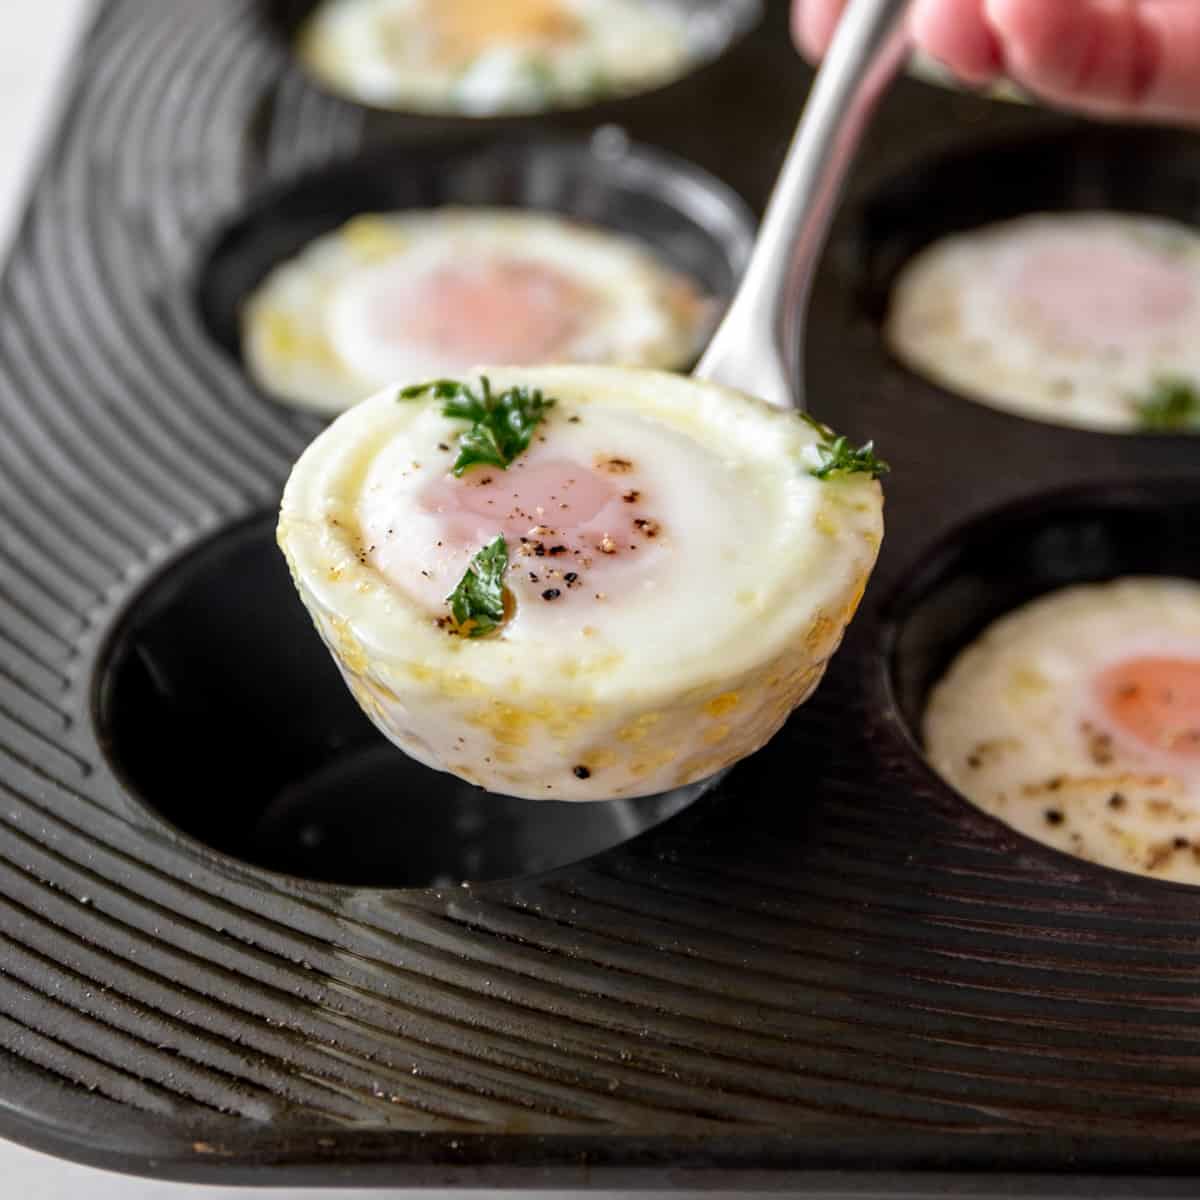 How to Bake Eggs in a Muffin Tin - Southern Bytes